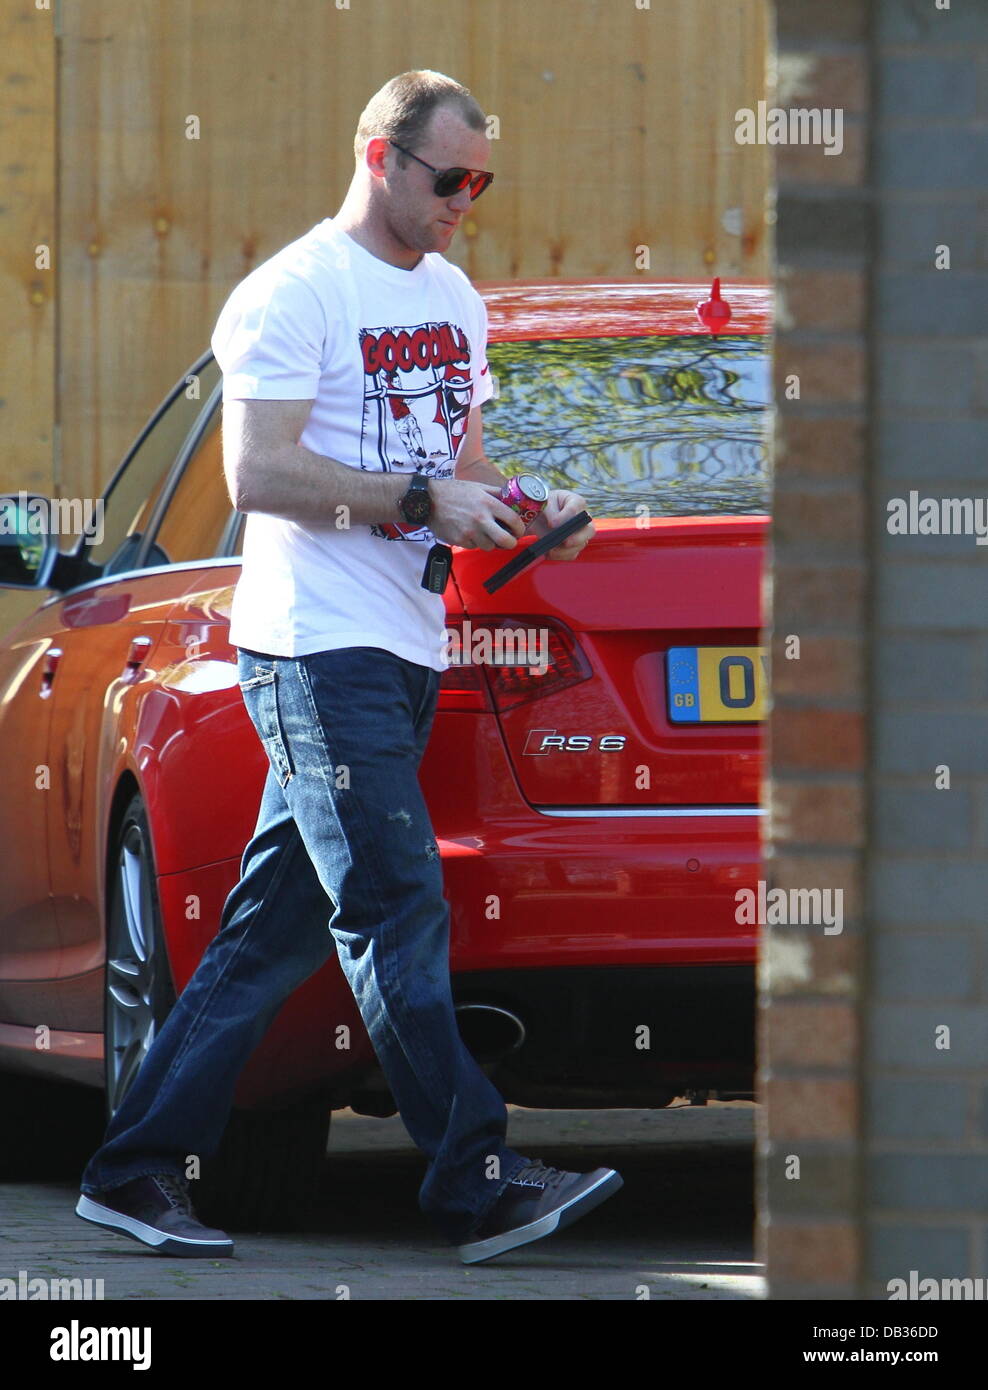 Wayne Rooney getting into his car at his wife's parents' house wearing a Nike t-shirt with the word 'Goooal!' written on it. Liverpool, England - 09.04.11 Stock Photo